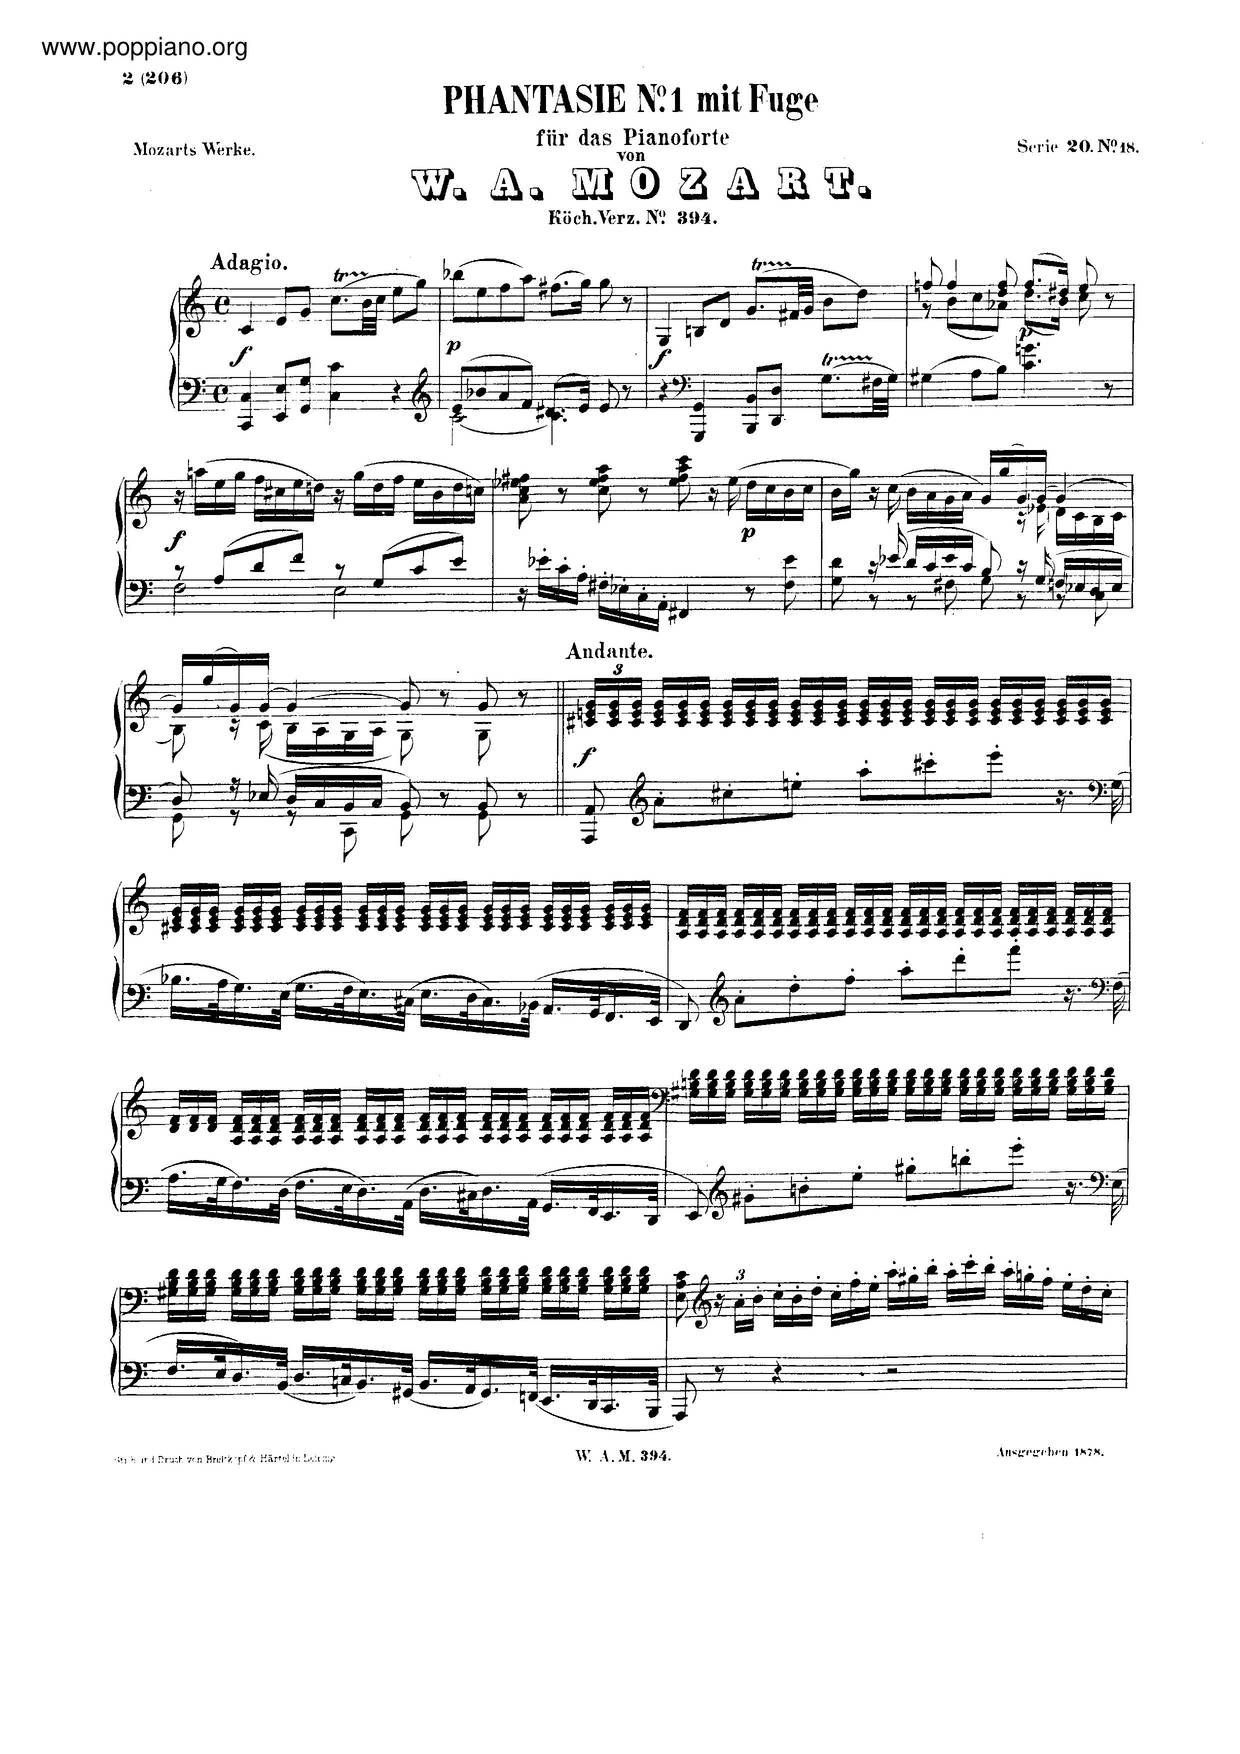 Prelude And Fugue In C Major, K. 394/383A琴谱